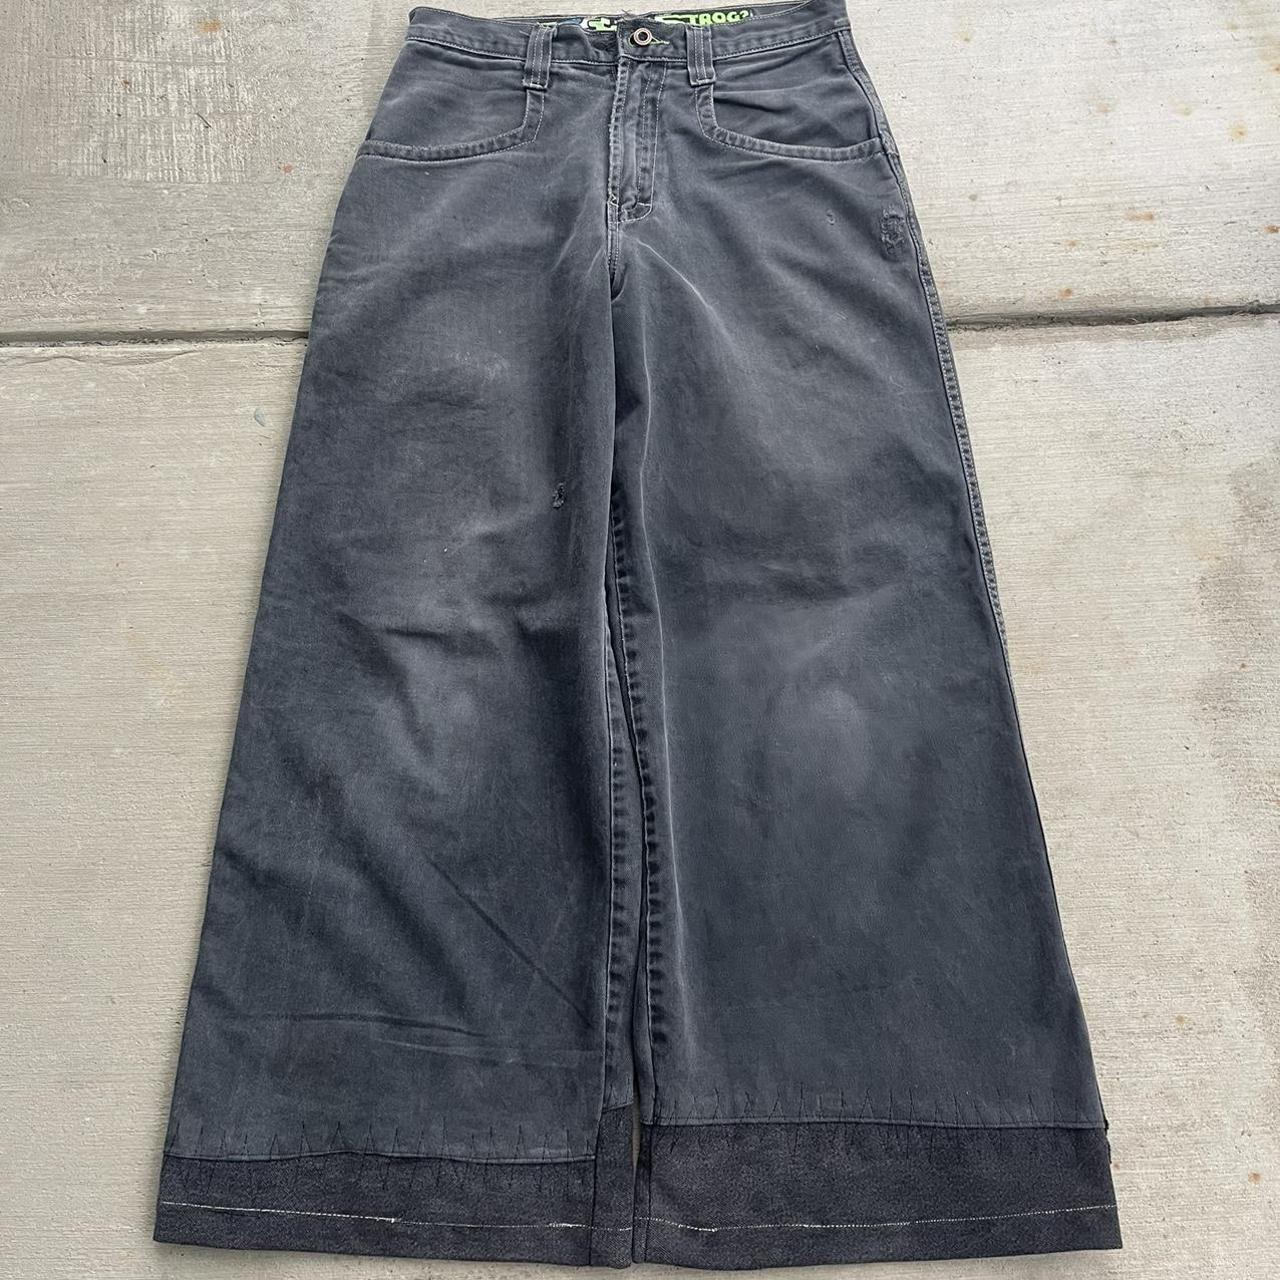 JNCO TROG ? 324 jeans insane fade on this pair.... - Depop